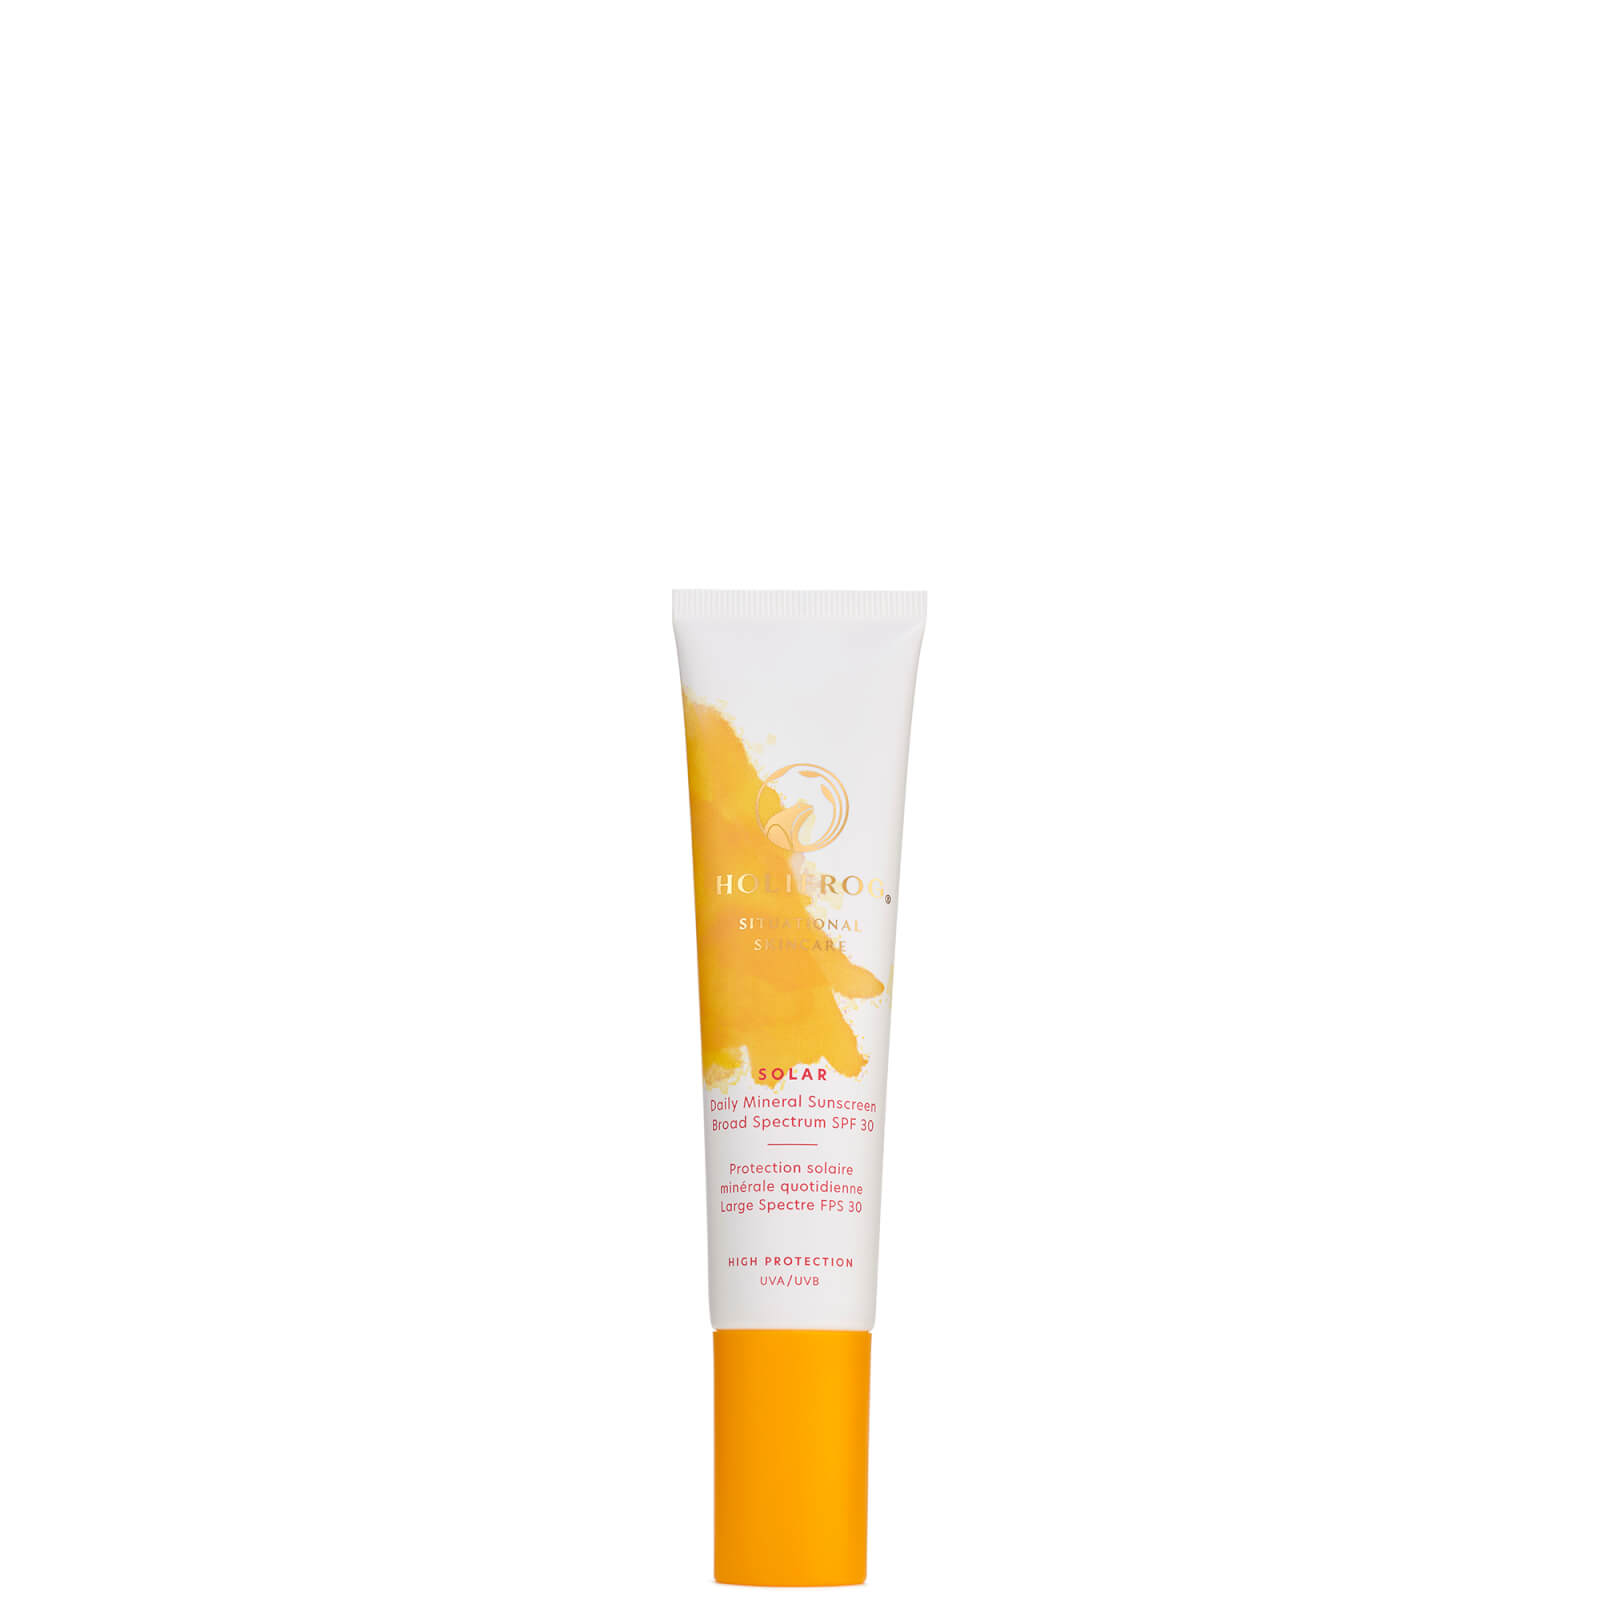 Holifrog Solar Daily Mineral Sunscreen Broad Spectrum Spf 30 60ml